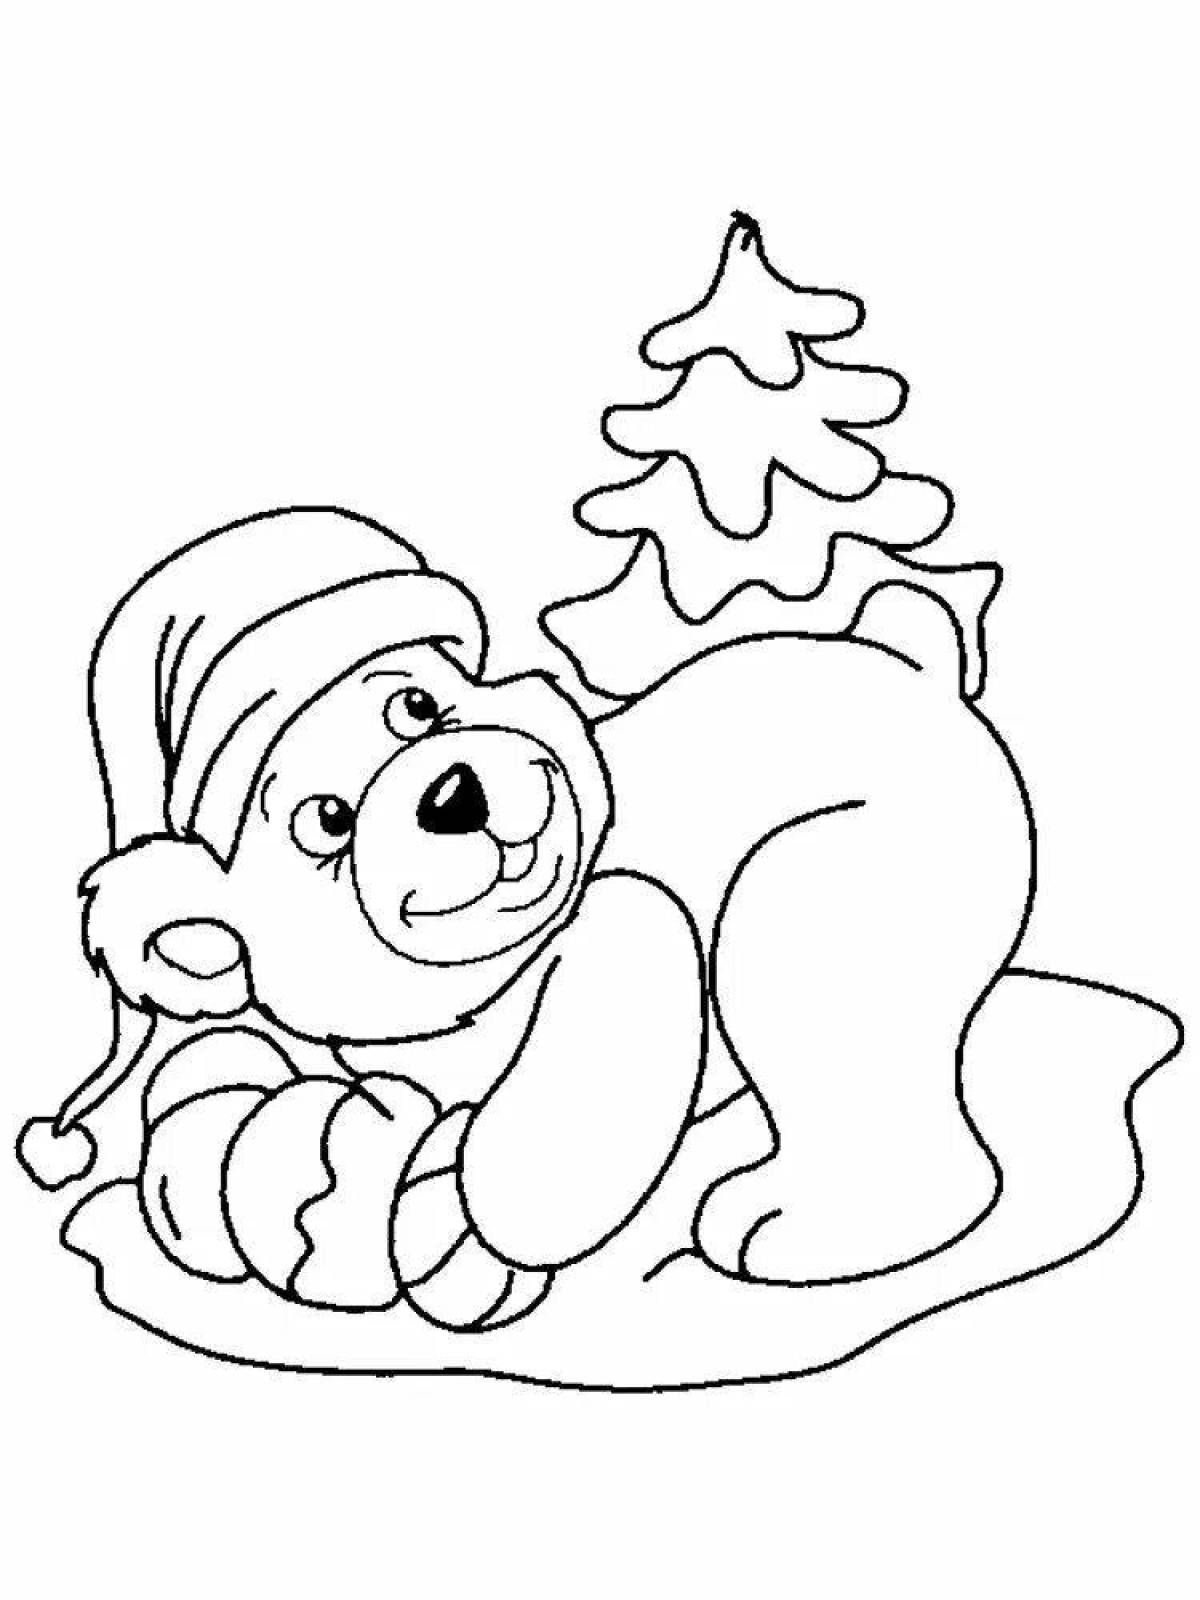 Live coloring for children 3-4 years old winter new year